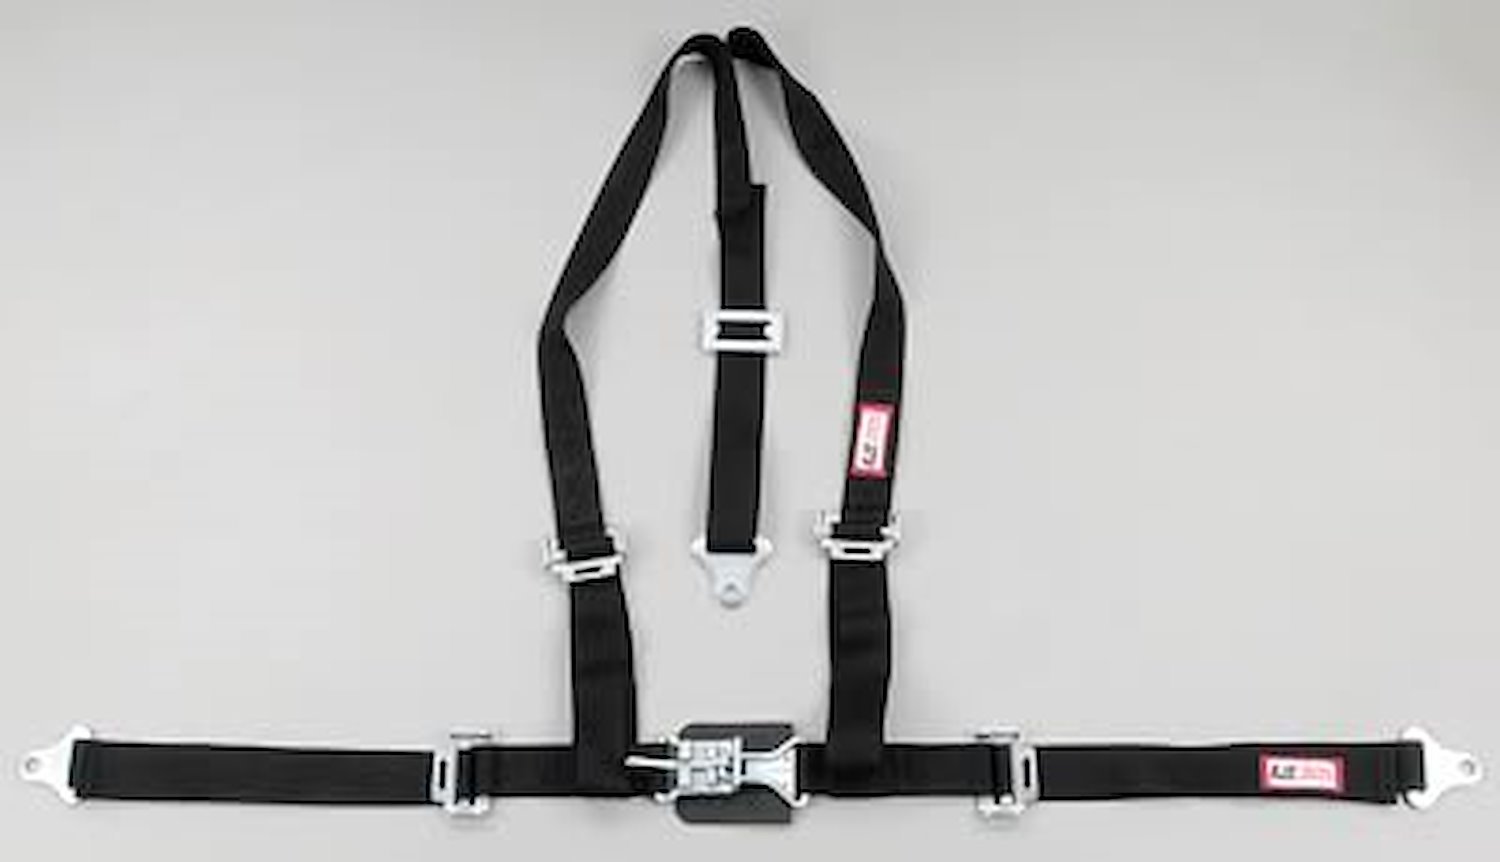 NON-SFI L&L HARNESS 2 PULL DOWN Lap Belt w/Adjuster SNAP 2 S.H. Individual ROLL BAR Mount WRAP/SNAP RED